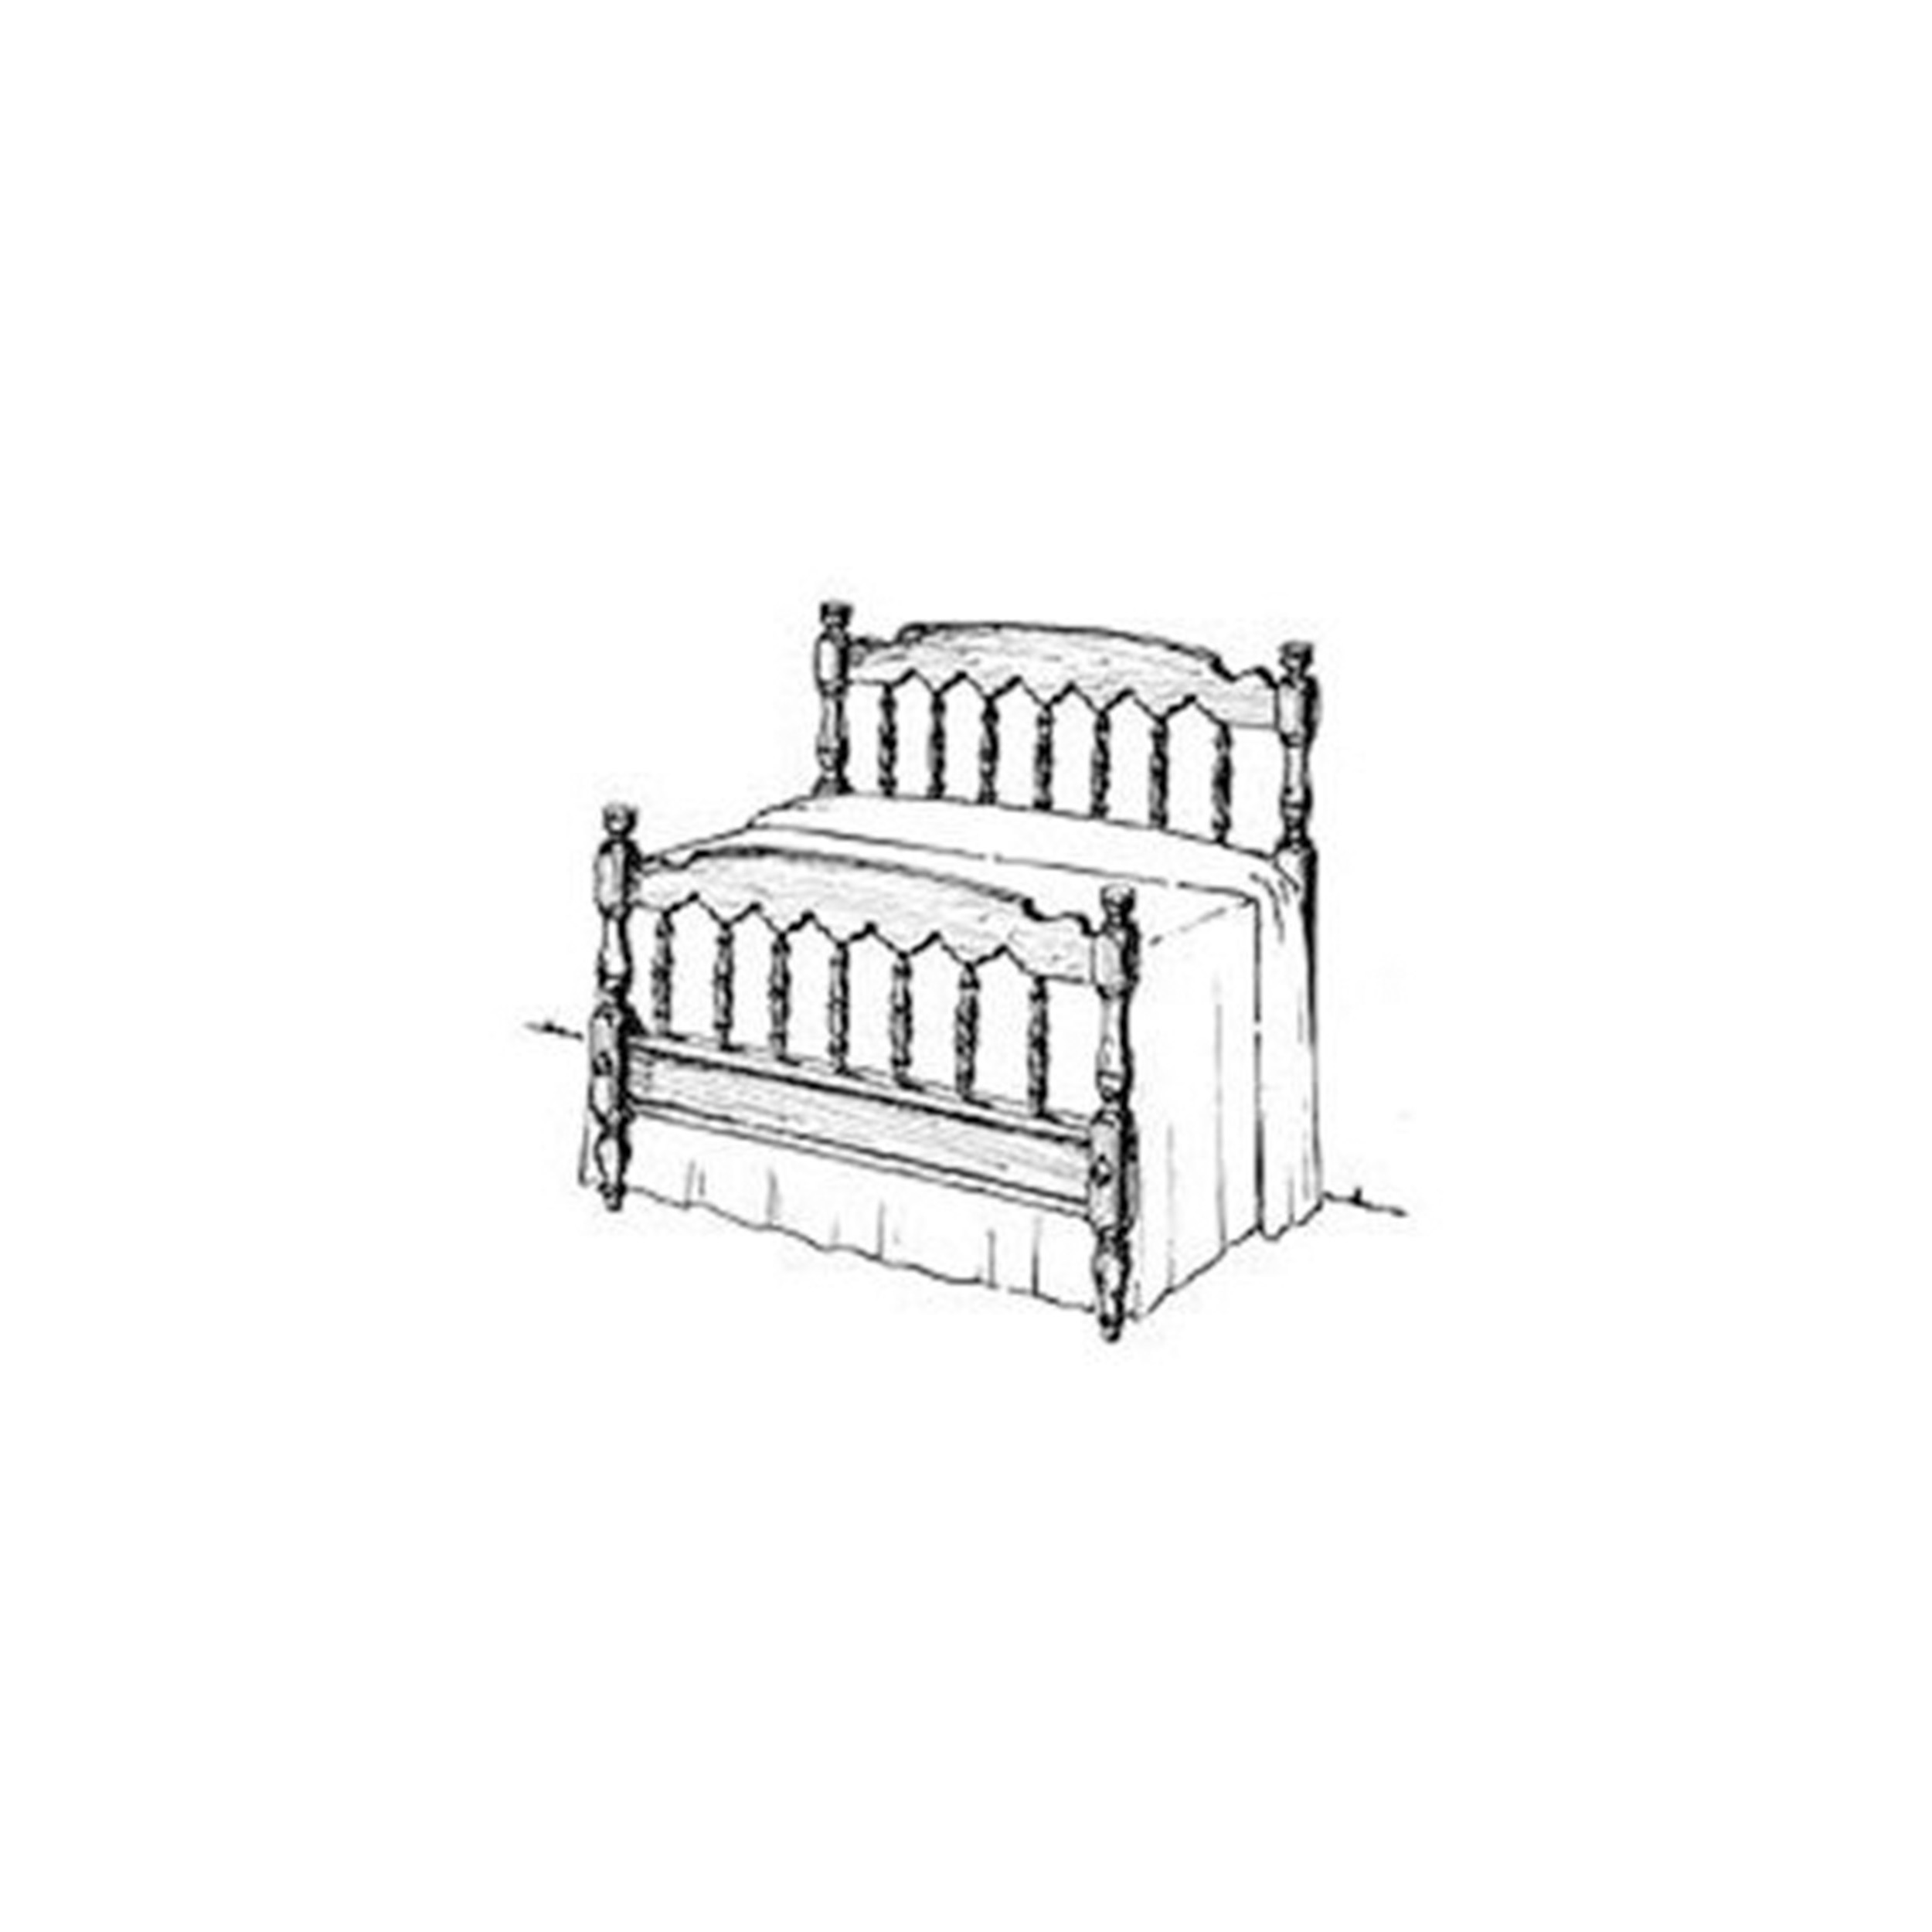 Woodworking Project Paper Plan To Build Colonial Bed